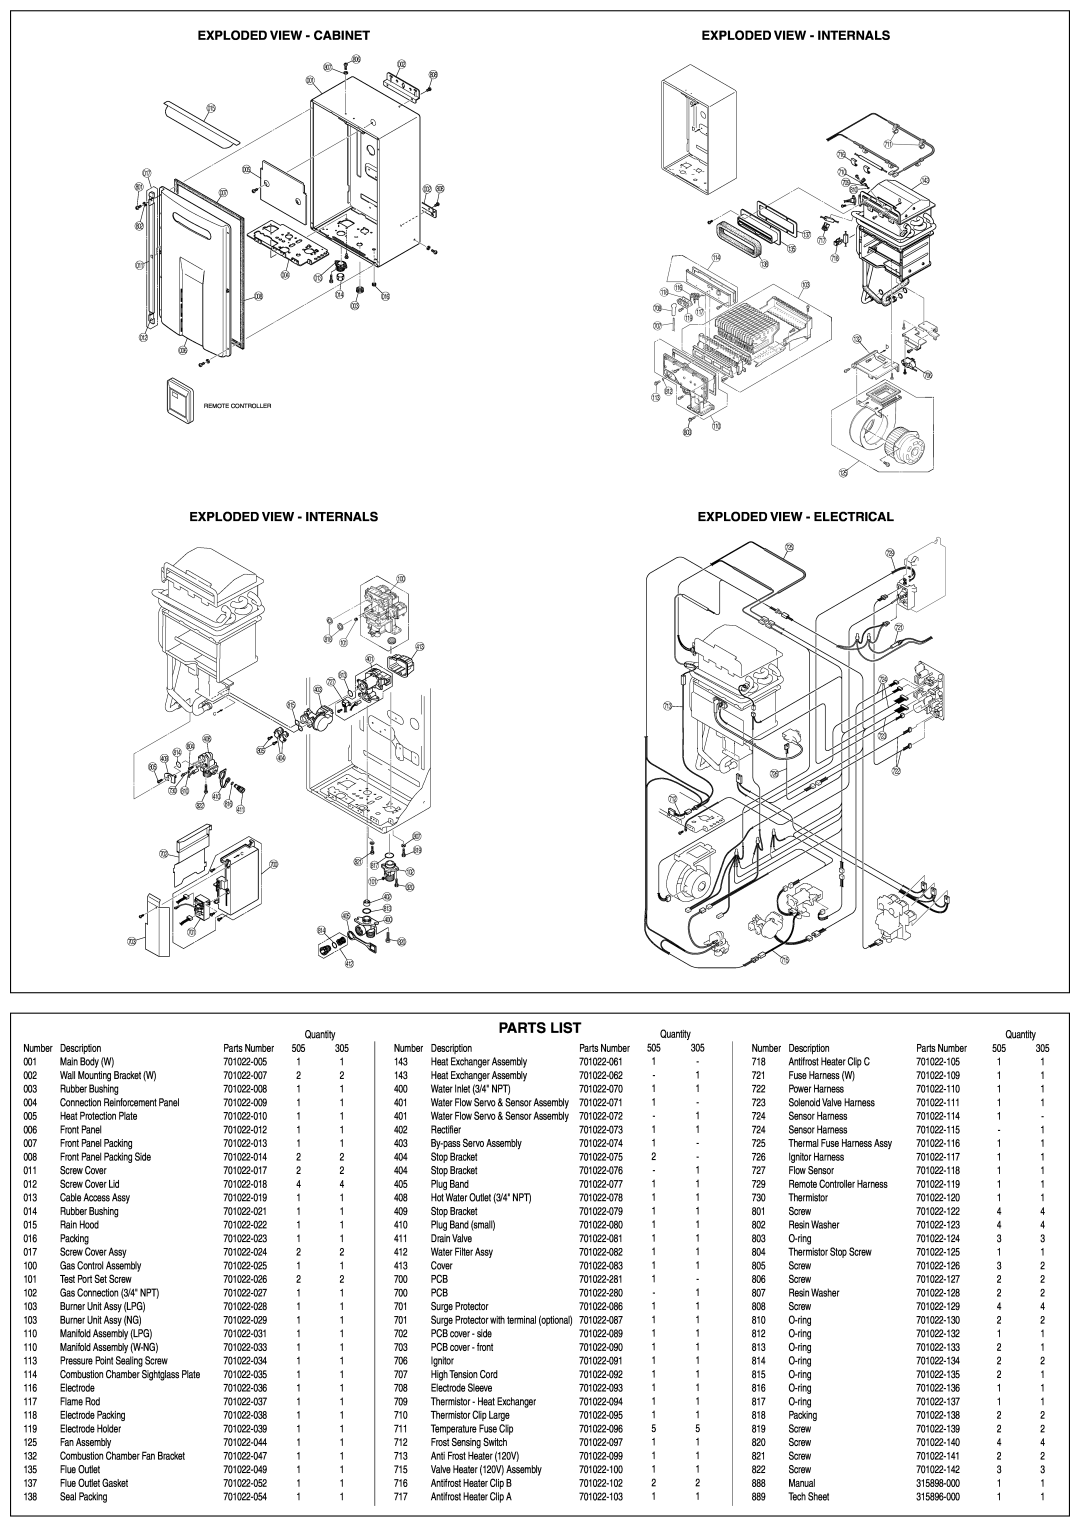 American Water Heater 305, 505 Parts List, Exploded View - Cabinet, Exploded View - Internals, Exploded View - Electrical 